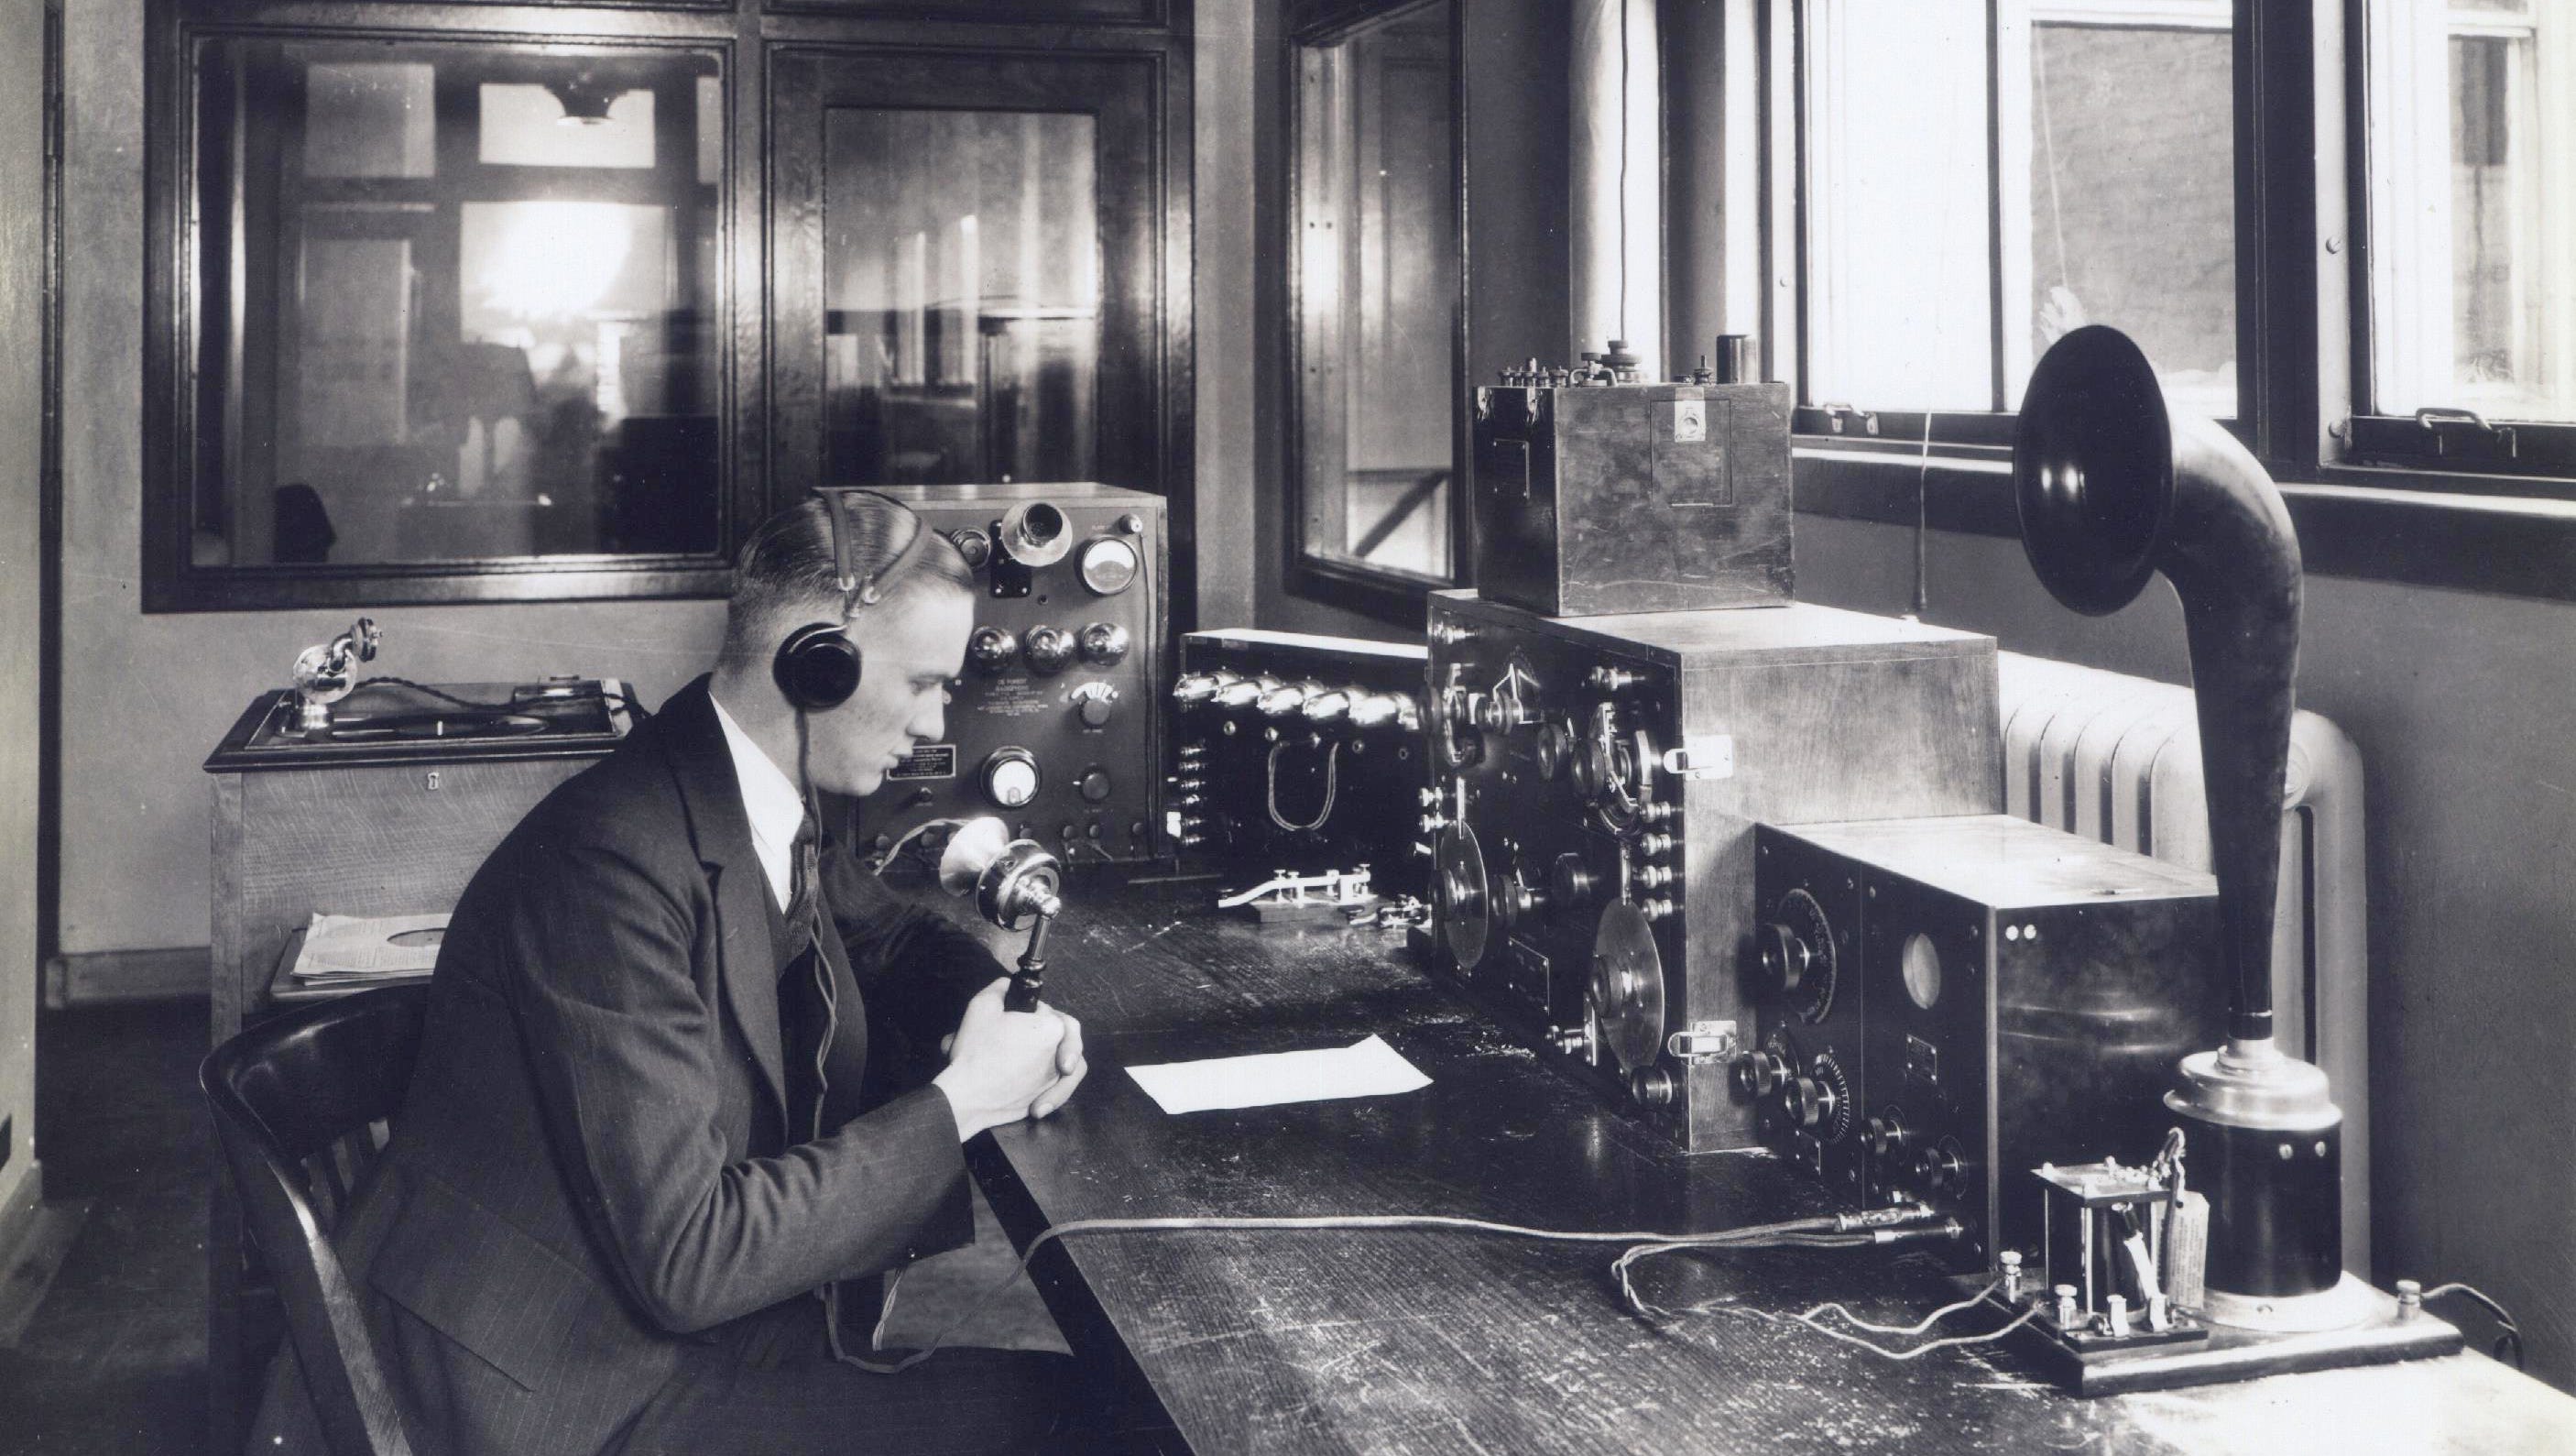 The radio station known for nearly a century now as WWJ began as a birthday gift from Detroit News Publisher W.E. Scripps to his son, W.J. "Bill" Scripps, who had asked for a radio set with which he could experiment.  Above, Fred Lathrop mans the operator's desk circa 1922.